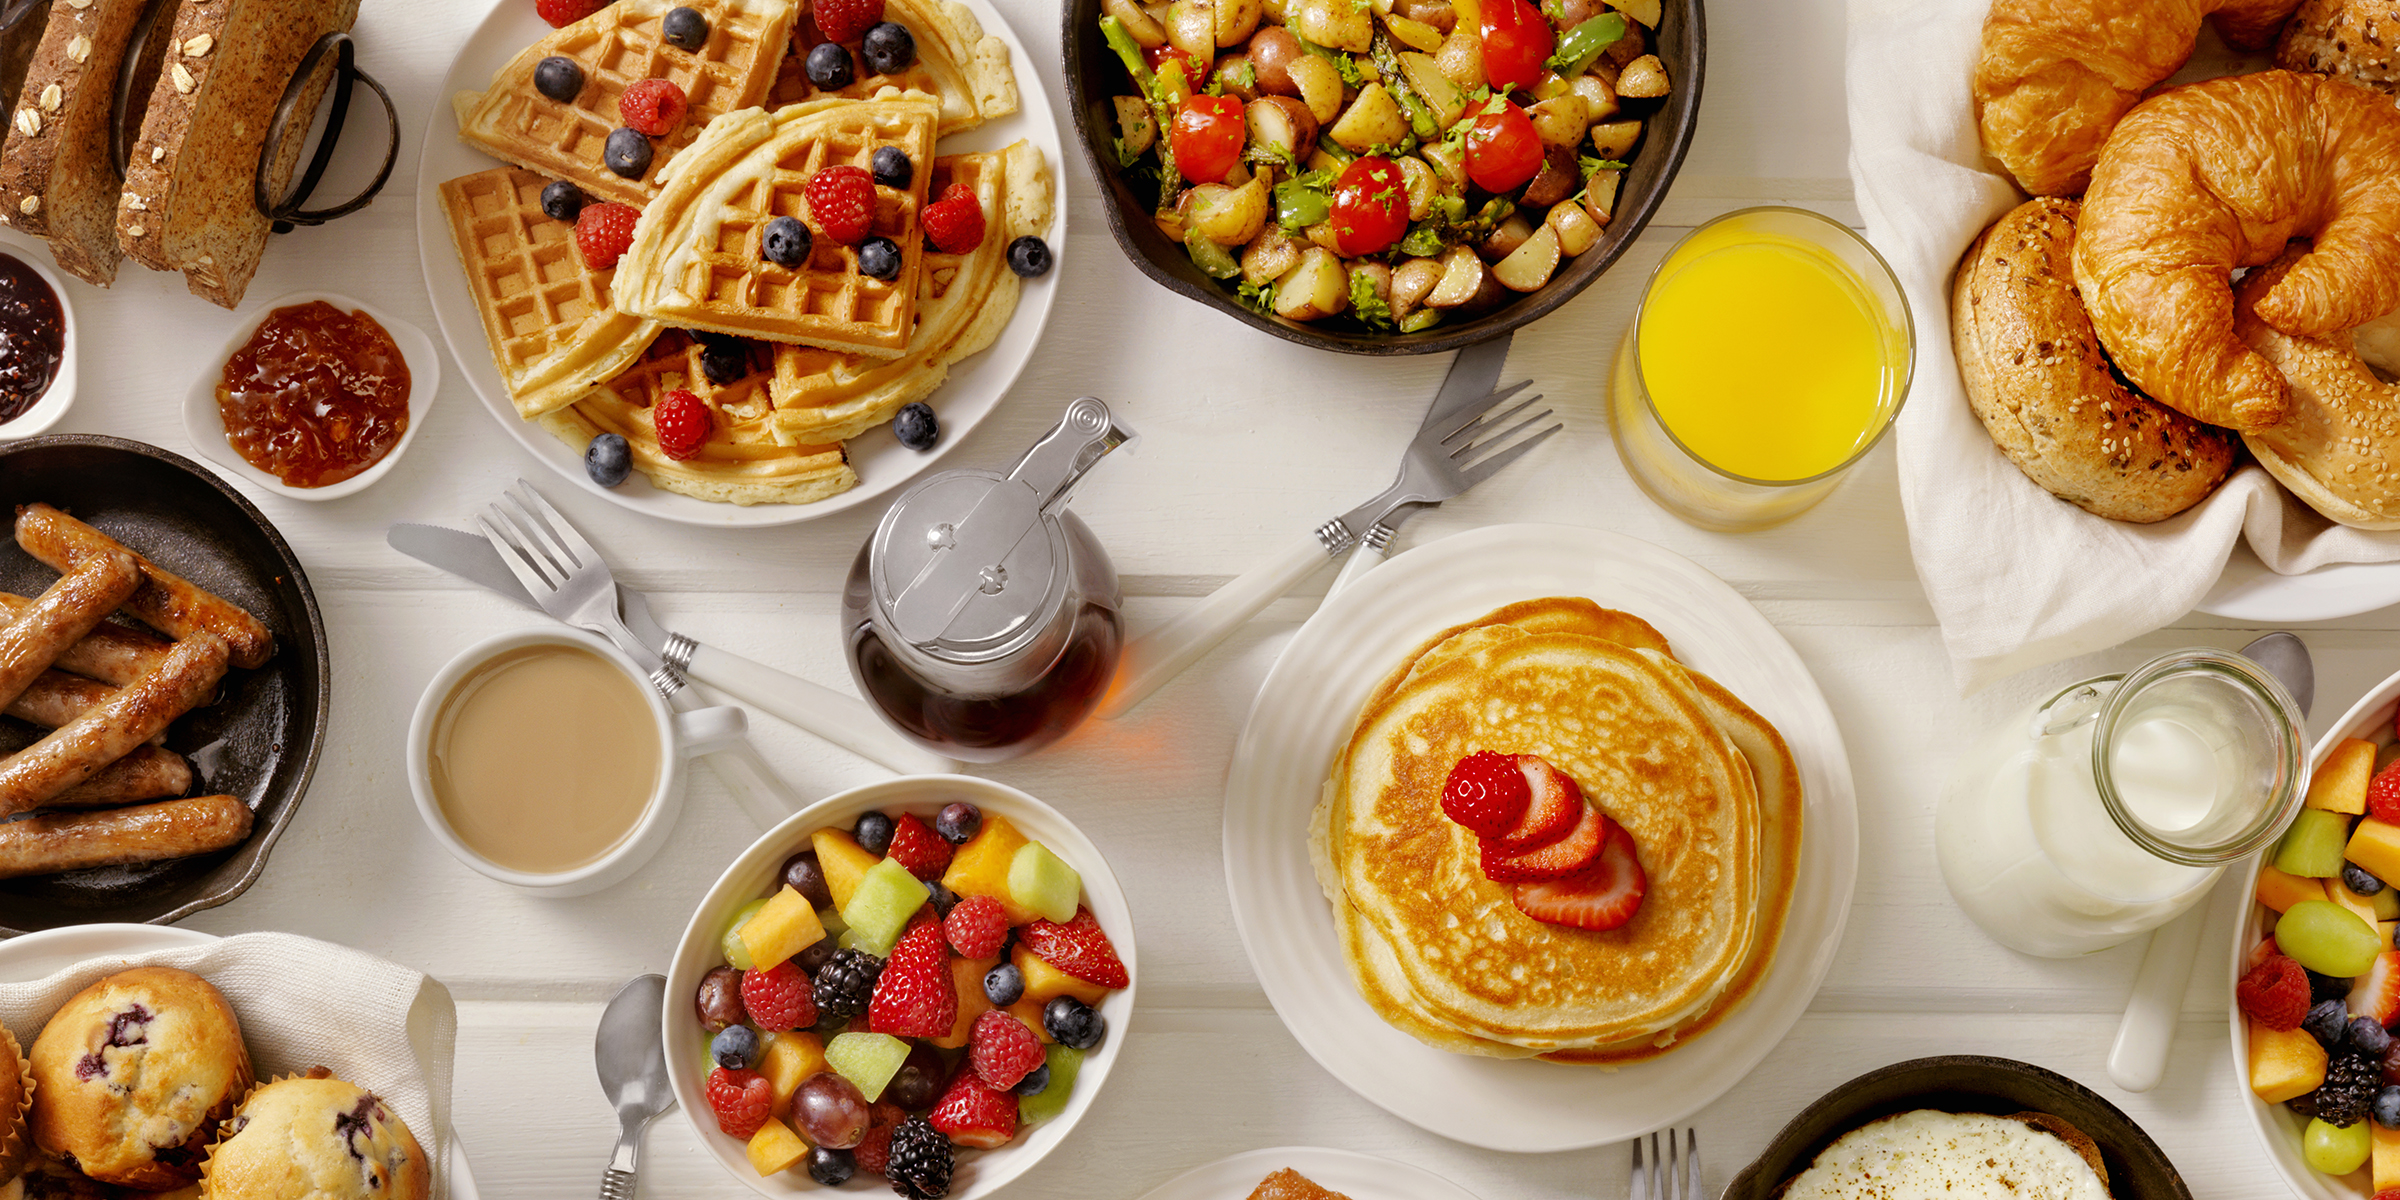 Top 10 Breakfast Foods in America: The Ultimate Guide to the Most Popular Breakfast Items and Traditional American Breakfast